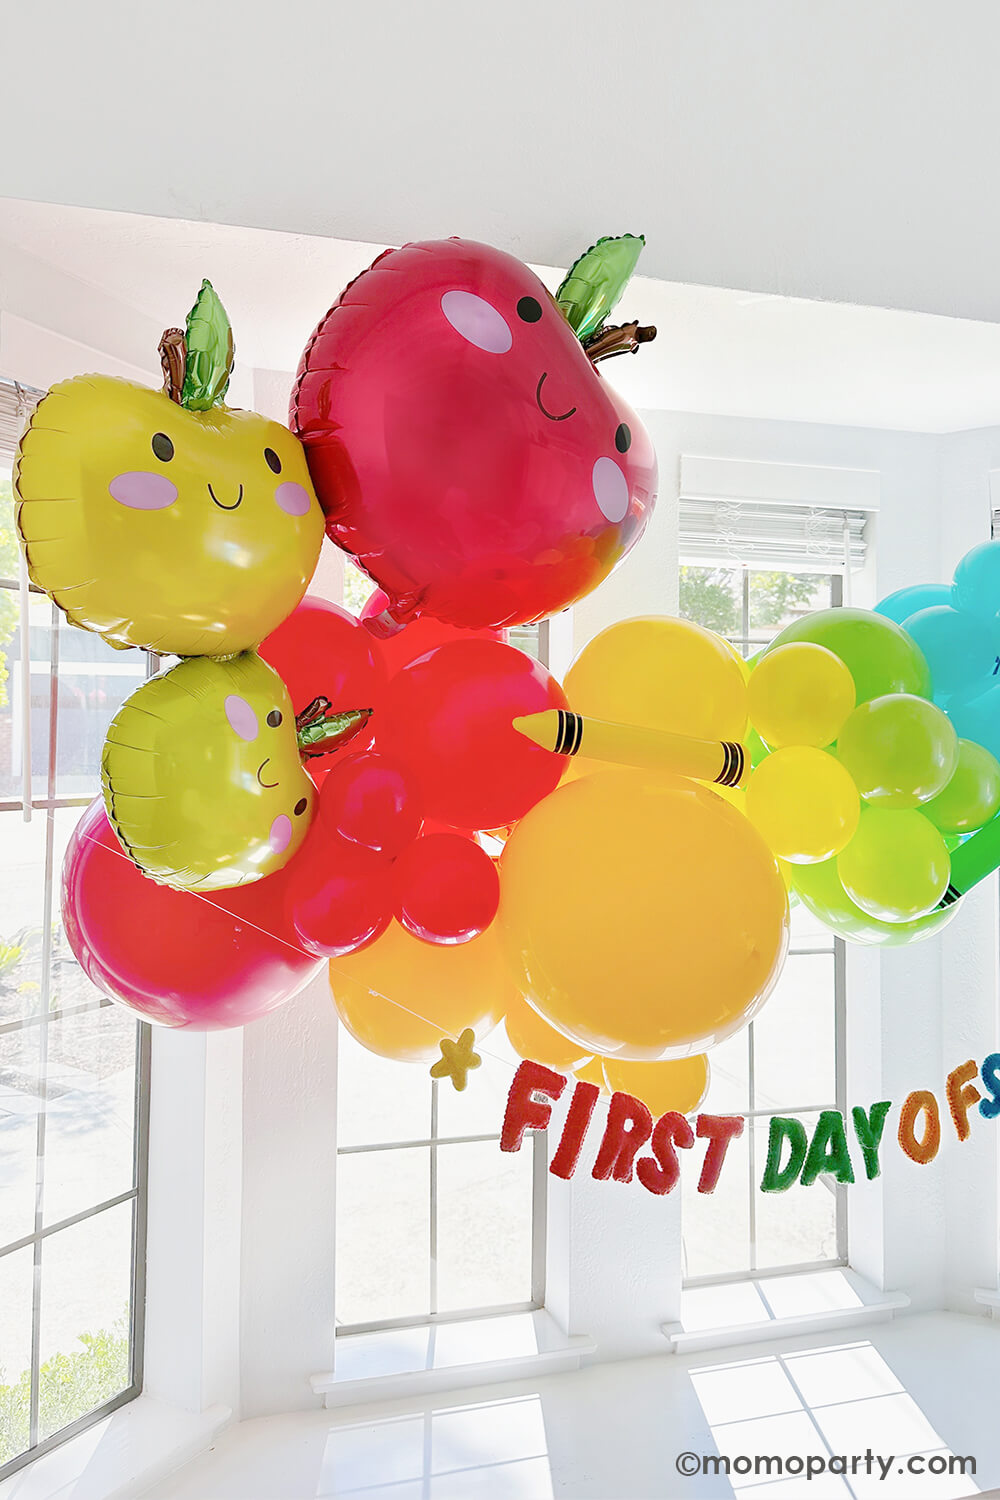 A bright, modern kitchen bay window in the morning decorated with Momo Party's first day of school balloon garlands in fun and bright colors. Underneath is a "first day of school" felt banner by Studio Pep. Along with the adorable apple stacker foil balloon, this makes a great back to school decoration idea and inspiration for any school themed celebration!